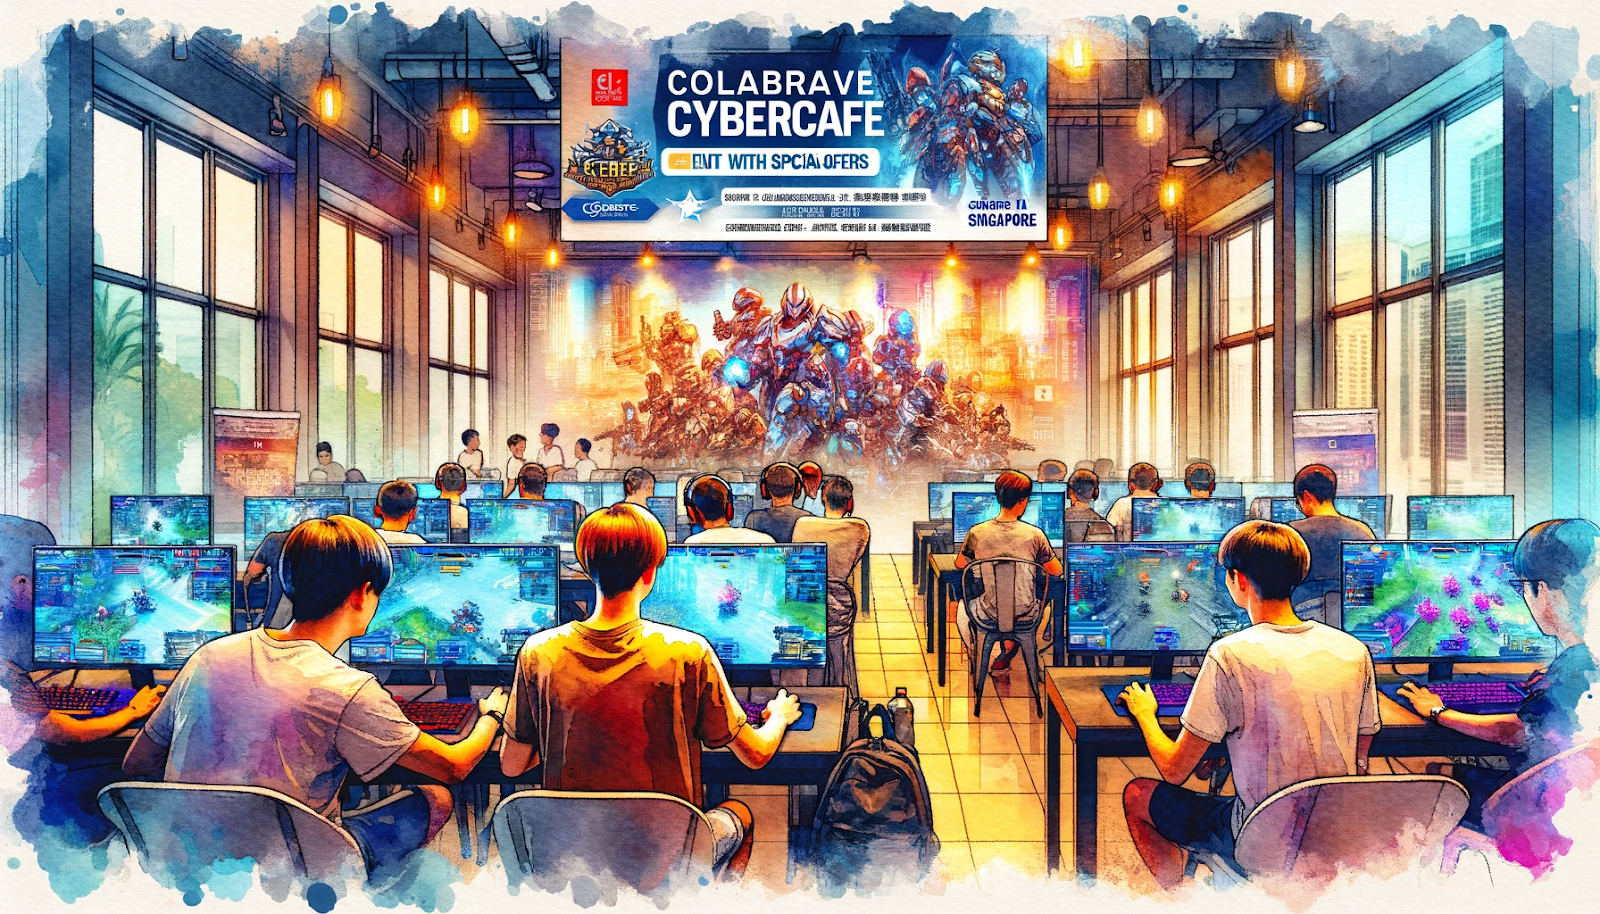 A cybercafe in Singapore showcasing a collaborative gaming event